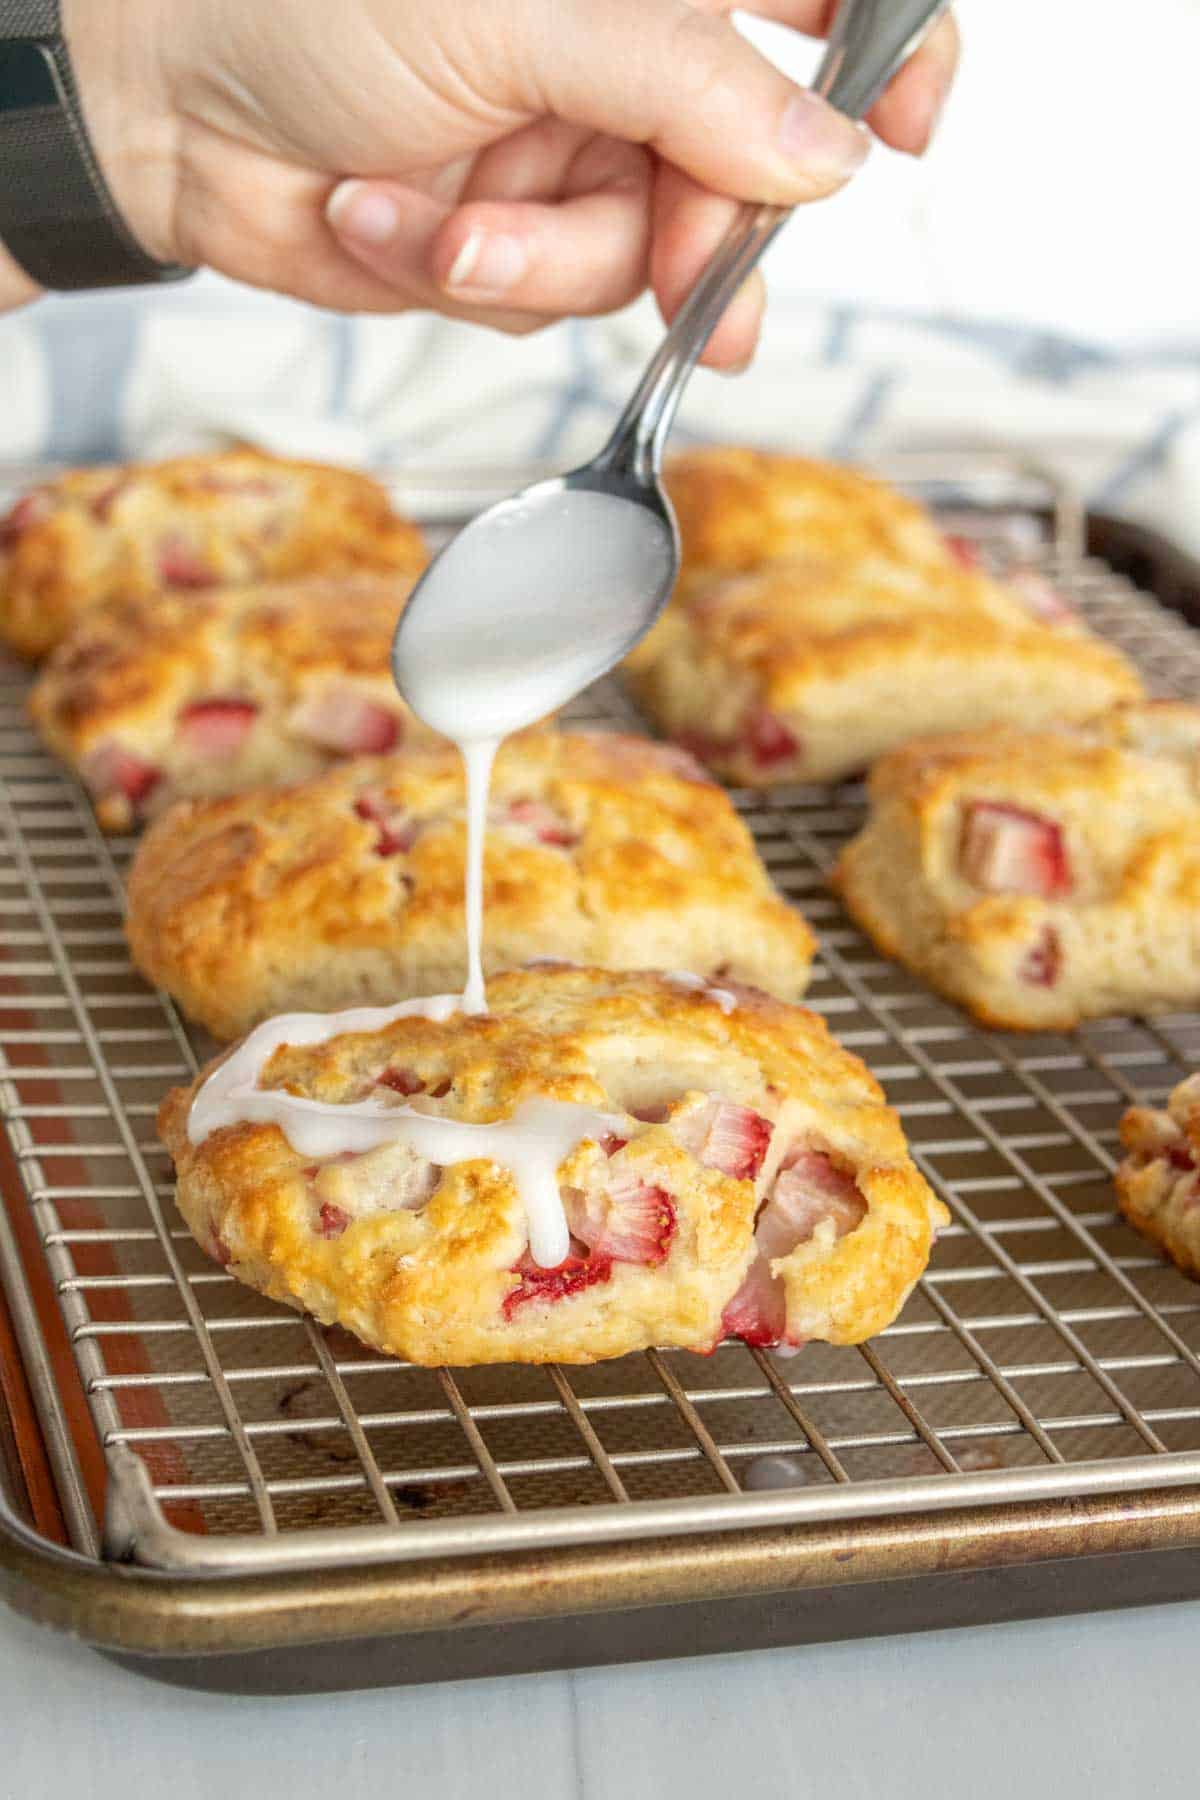 A hand drizzling icing on fresh strawberry biscuits cooling on a wire rack.